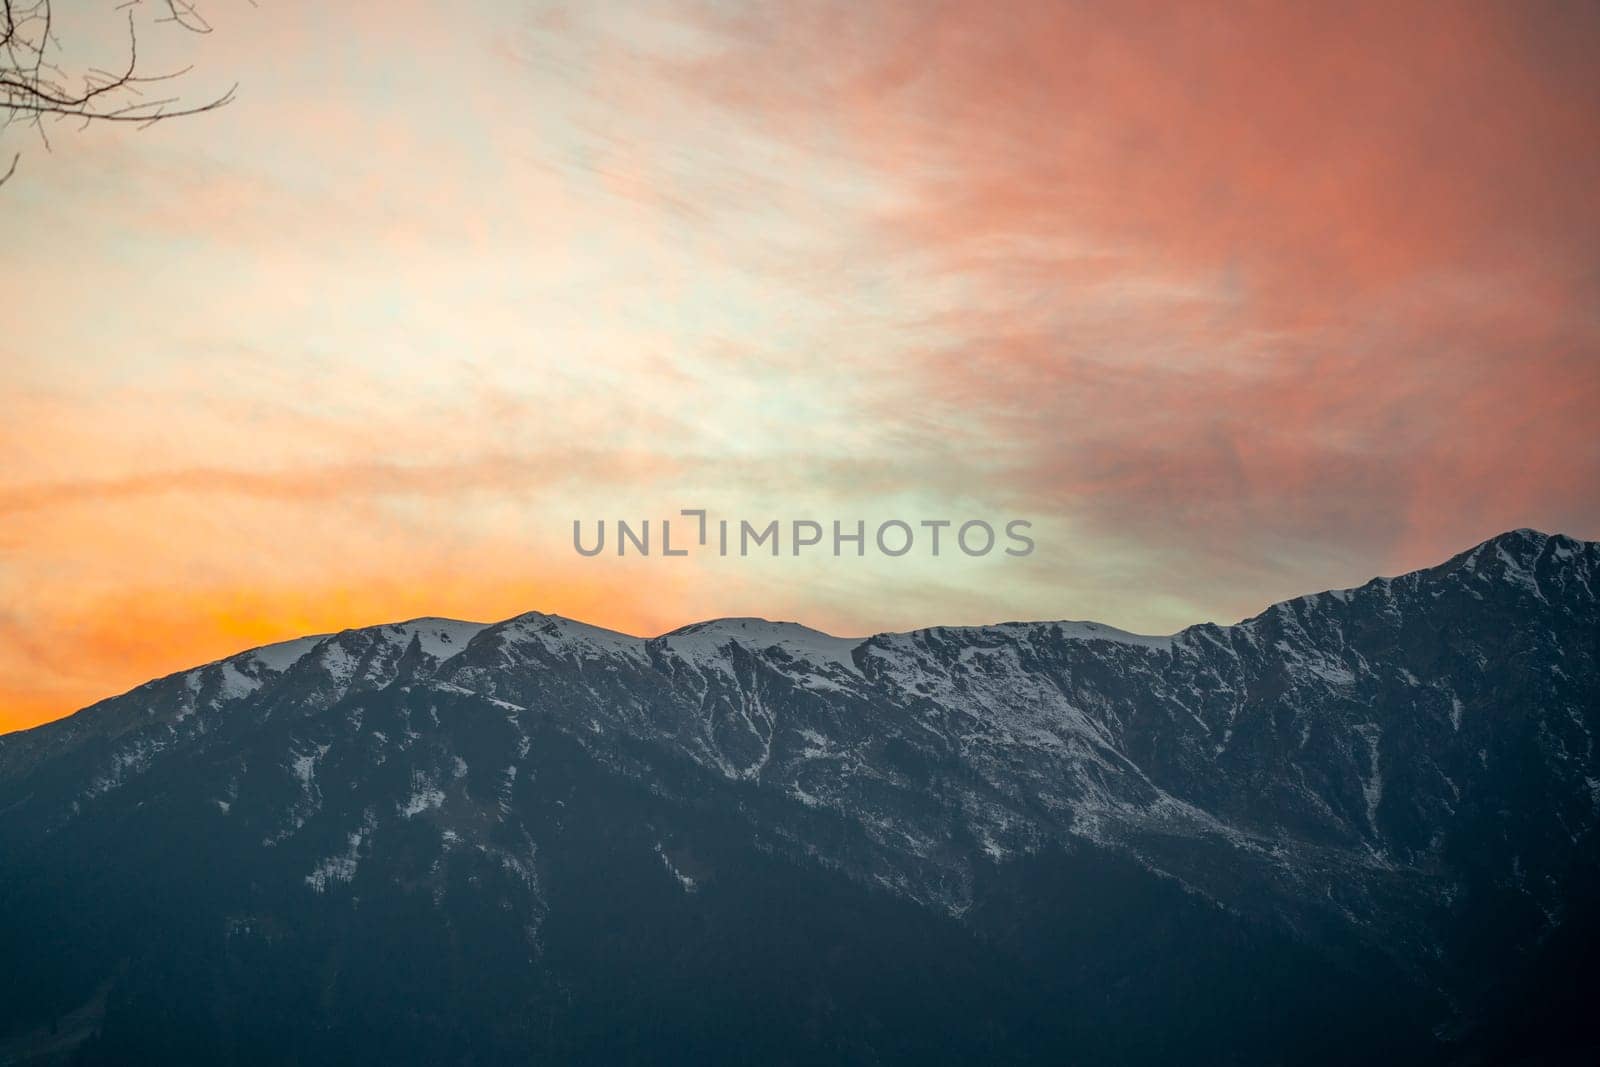 Sunrise sunset dusk dawn colors over the himalaya mountains with fog haze in distance with rich orange and red colors in manali kullu shimla by Shalinimathur